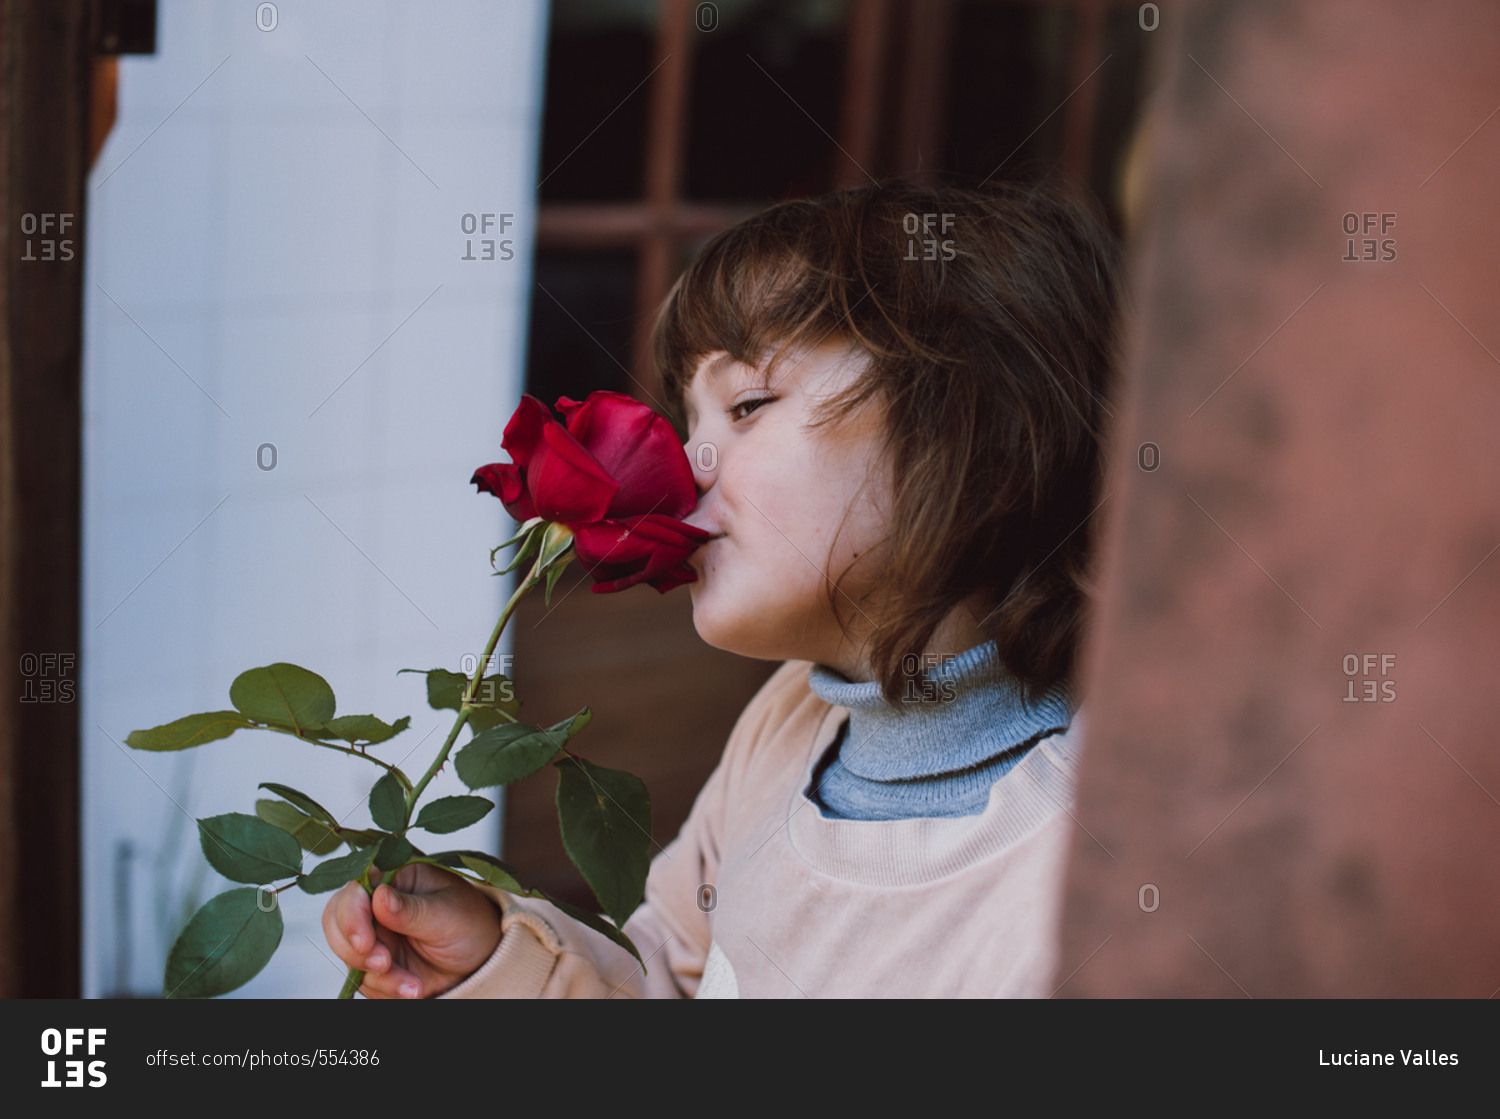 Young girl stiffing a red rose in garden